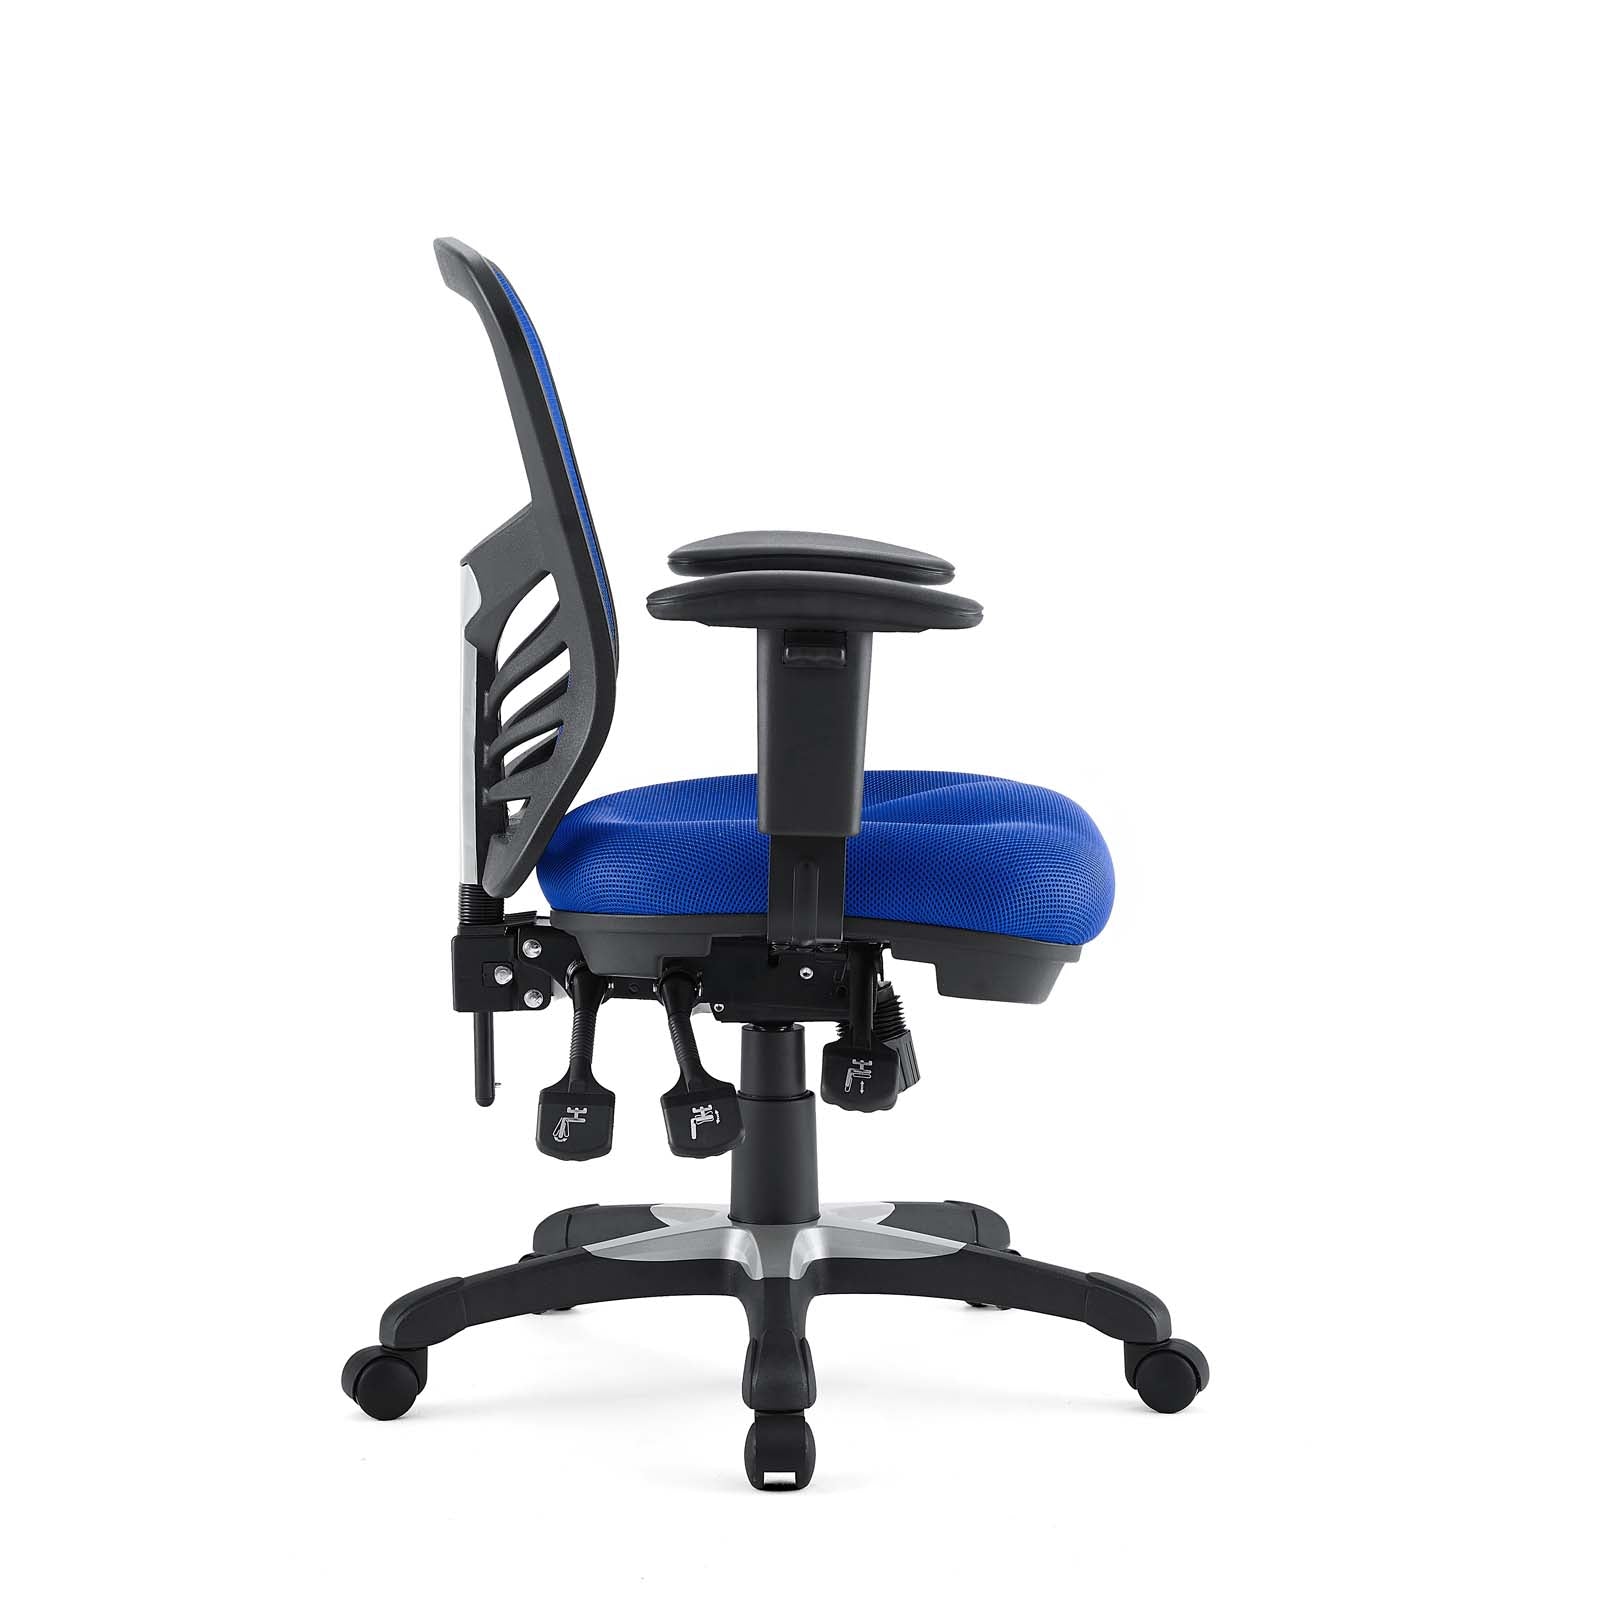 Articulate Mesh Office Chair - East Shore Modern Home Furnishings